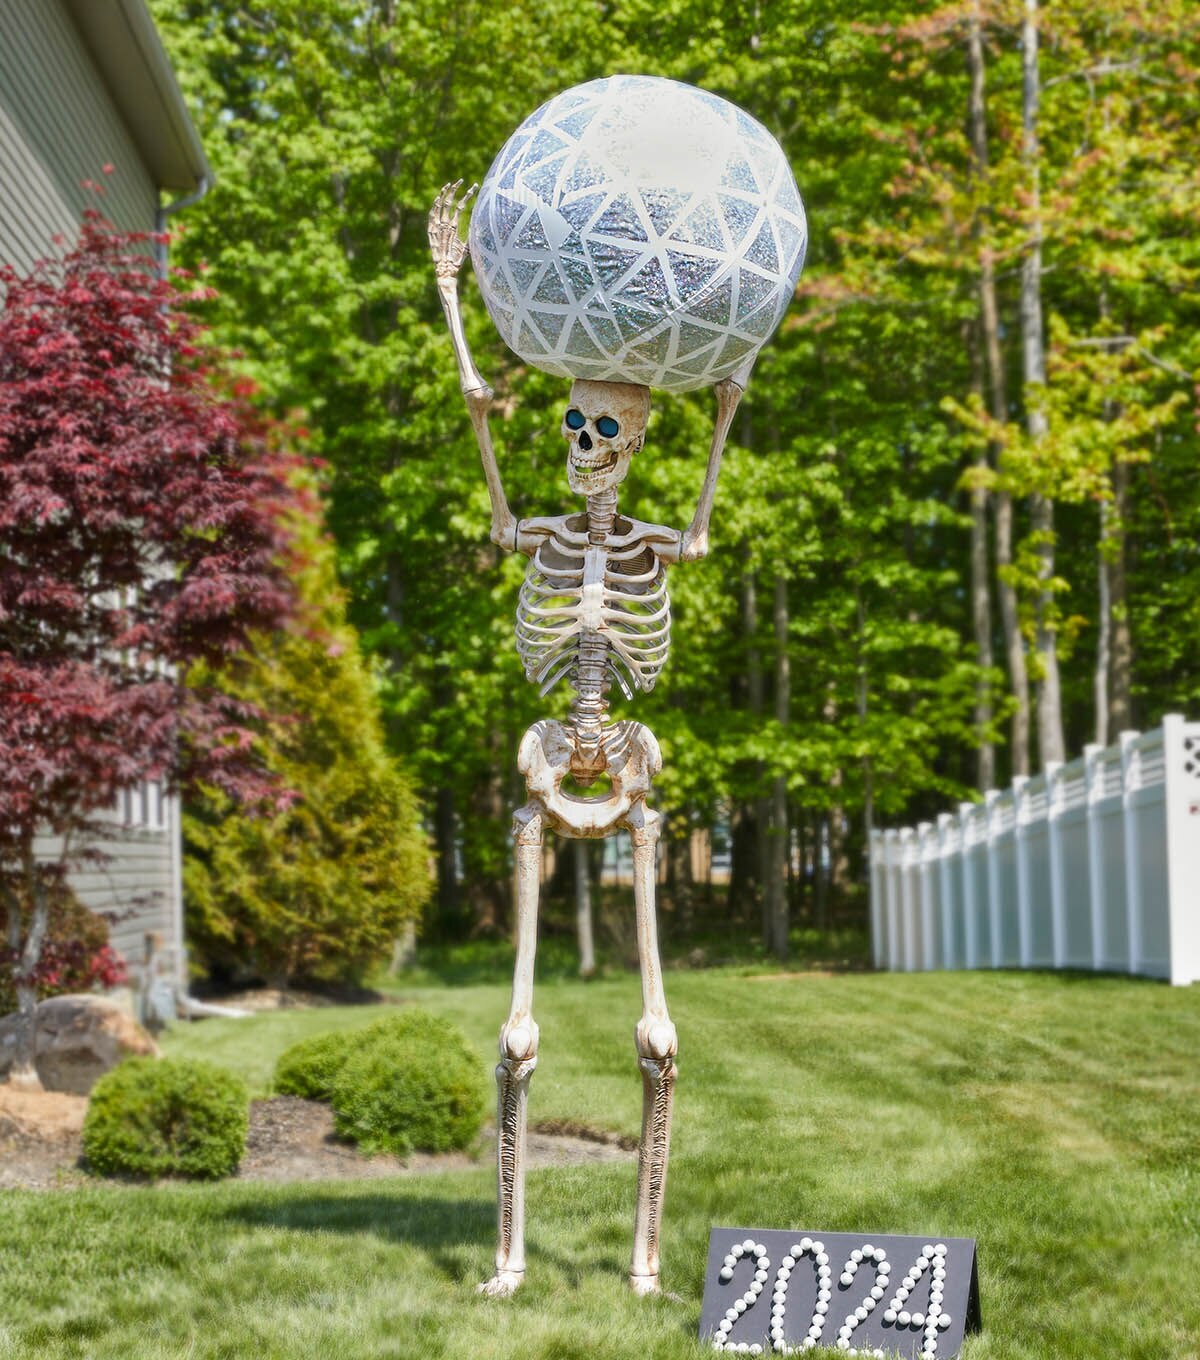 Halloween Decorating with Skeletons - DIY Inspired